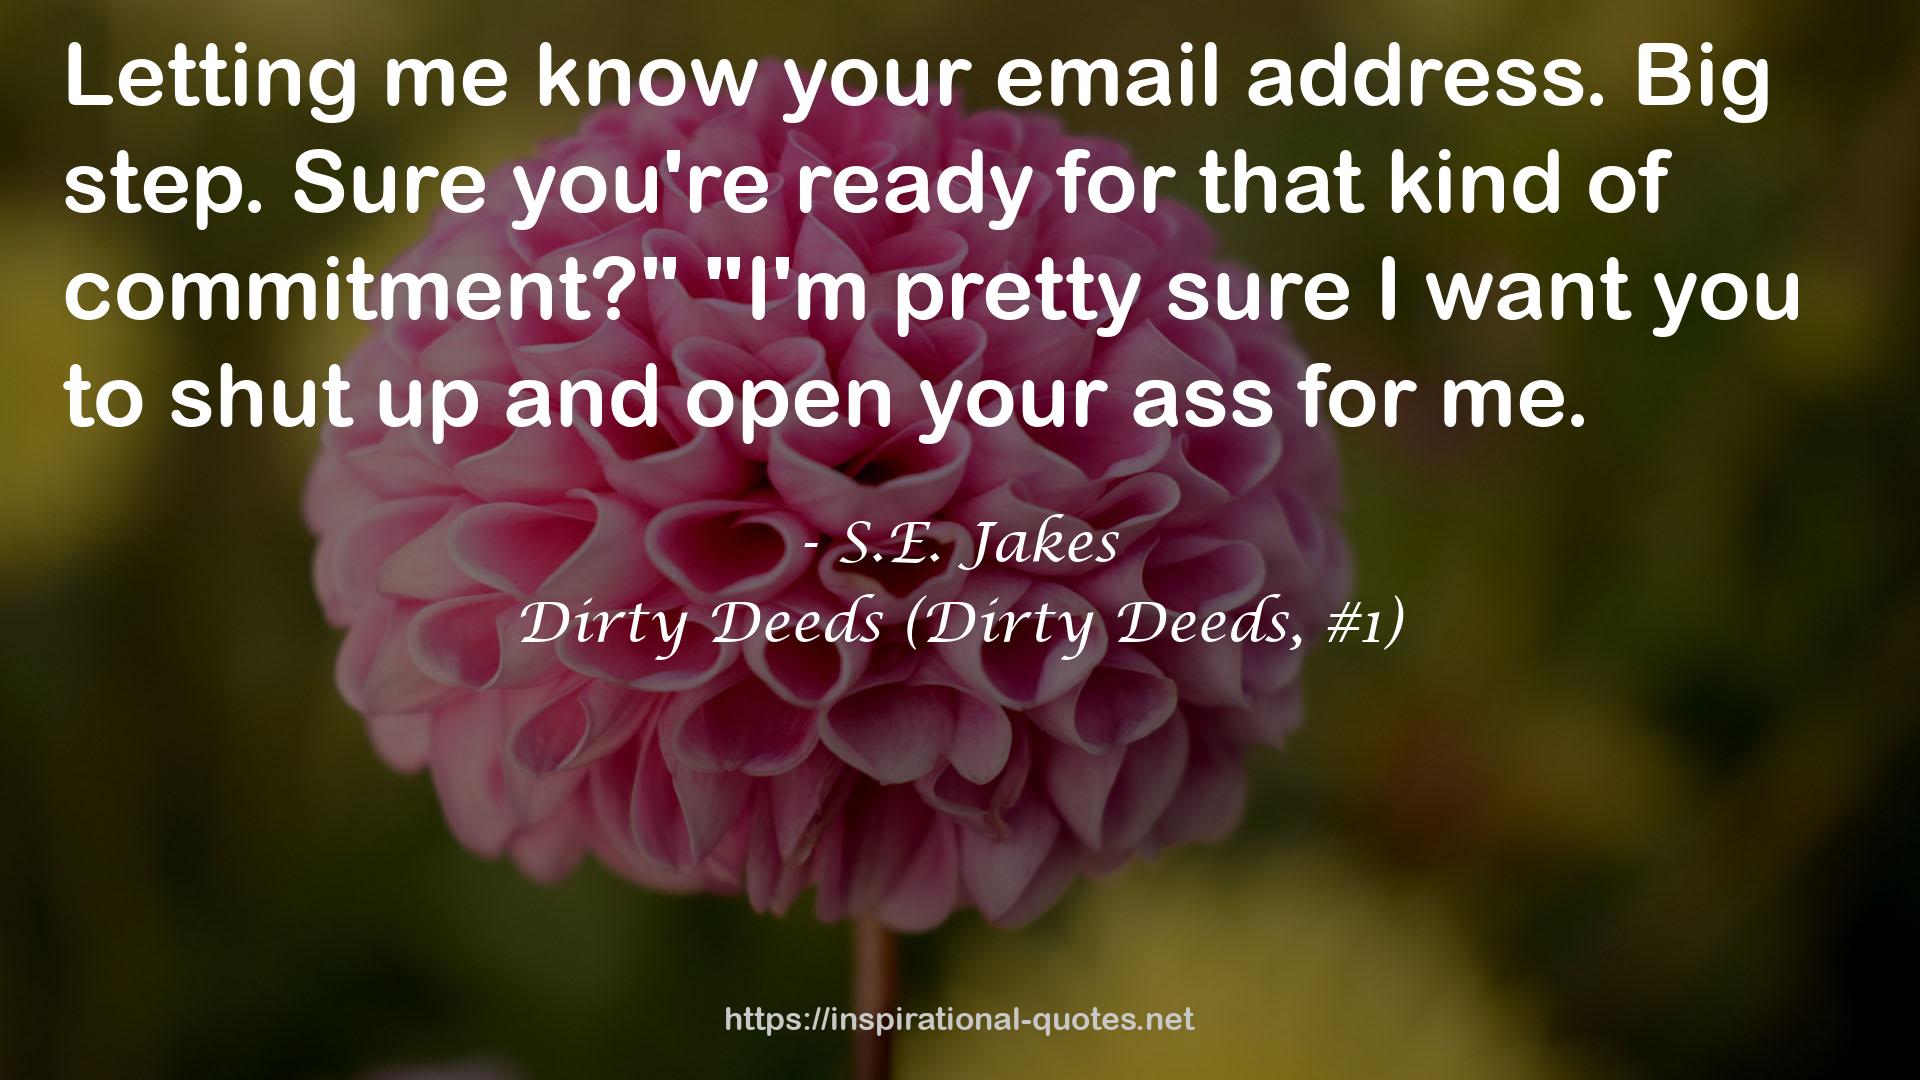 Dirty Deeds (Dirty Deeds, #1) QUOTES